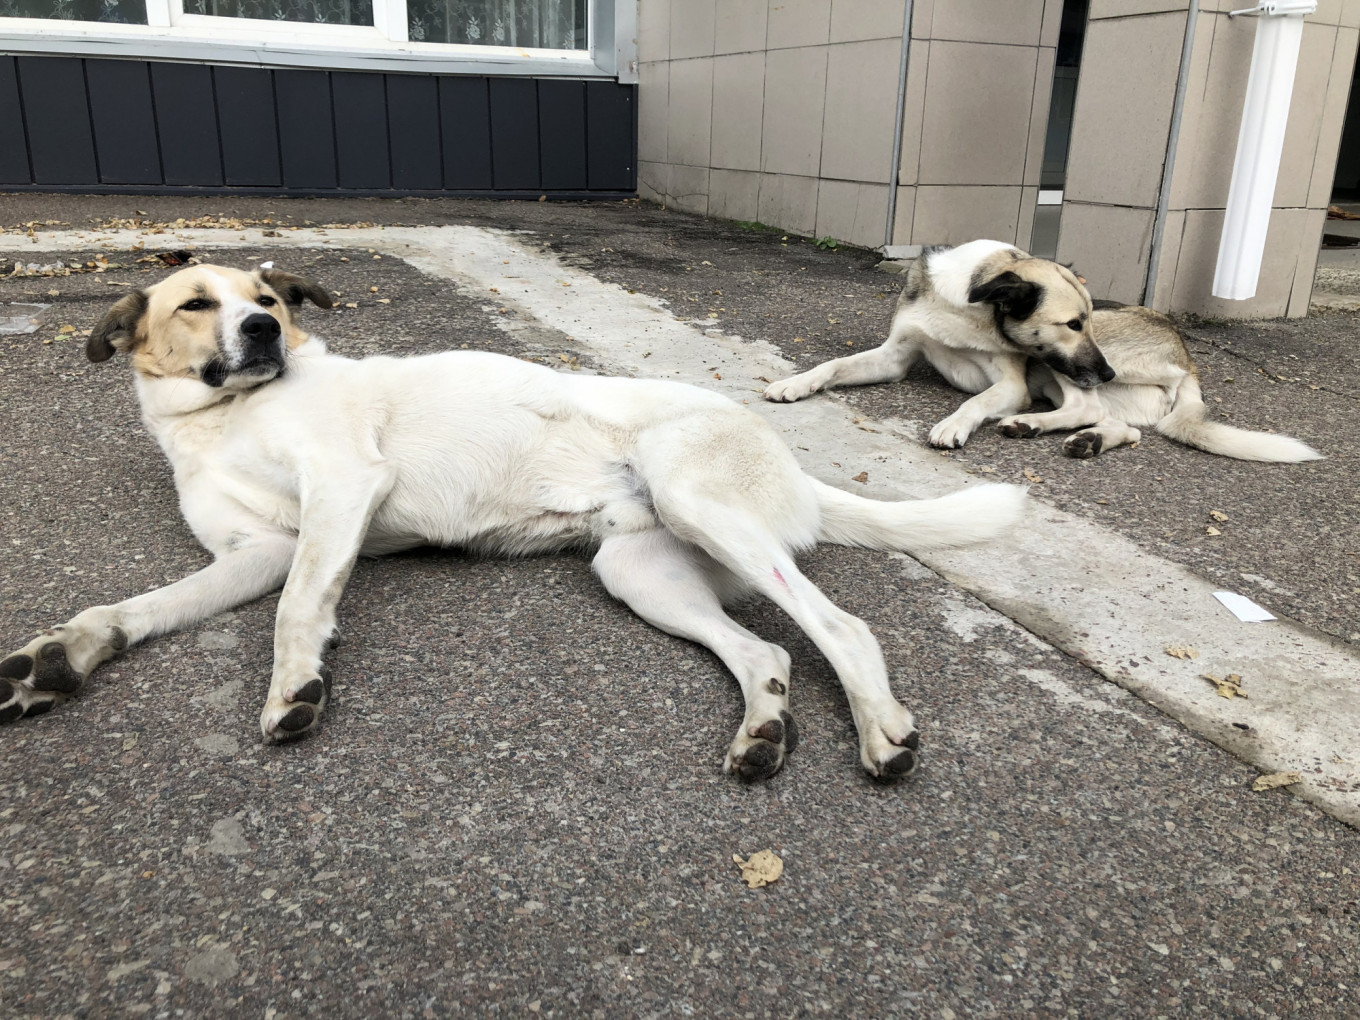 
					Dogs lounge outside the canteen in the exclusion zone where Chernobyl plant workers eat lunch every day. A sign near the door tells people not to feed them.					 					Sam Berkhead / MT				